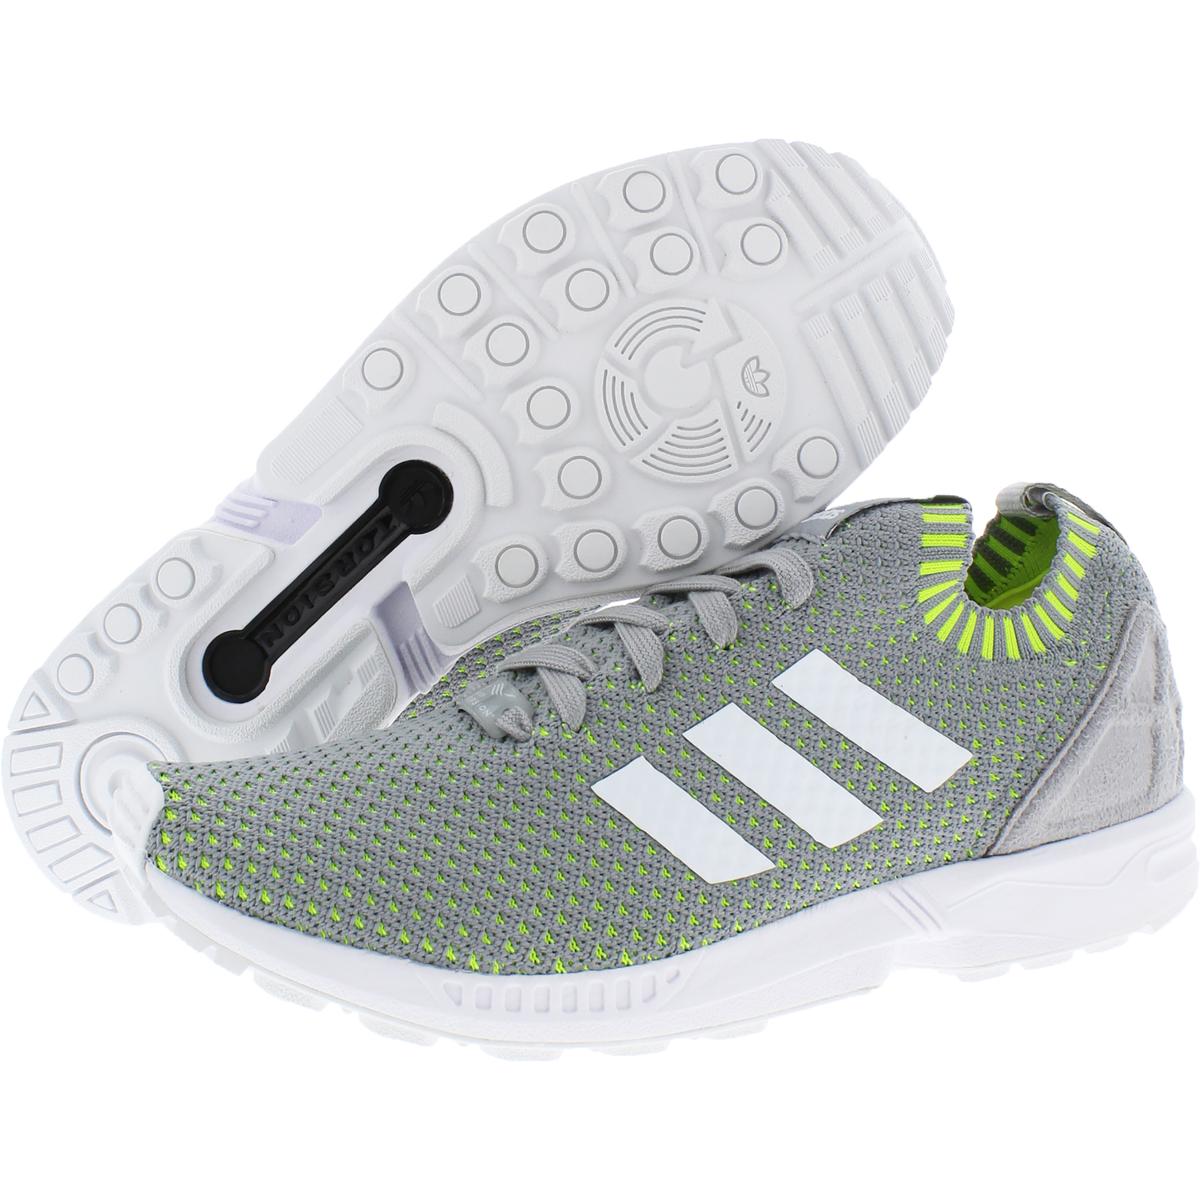 Zx Flux Mens Fitness Workout Running Shoes